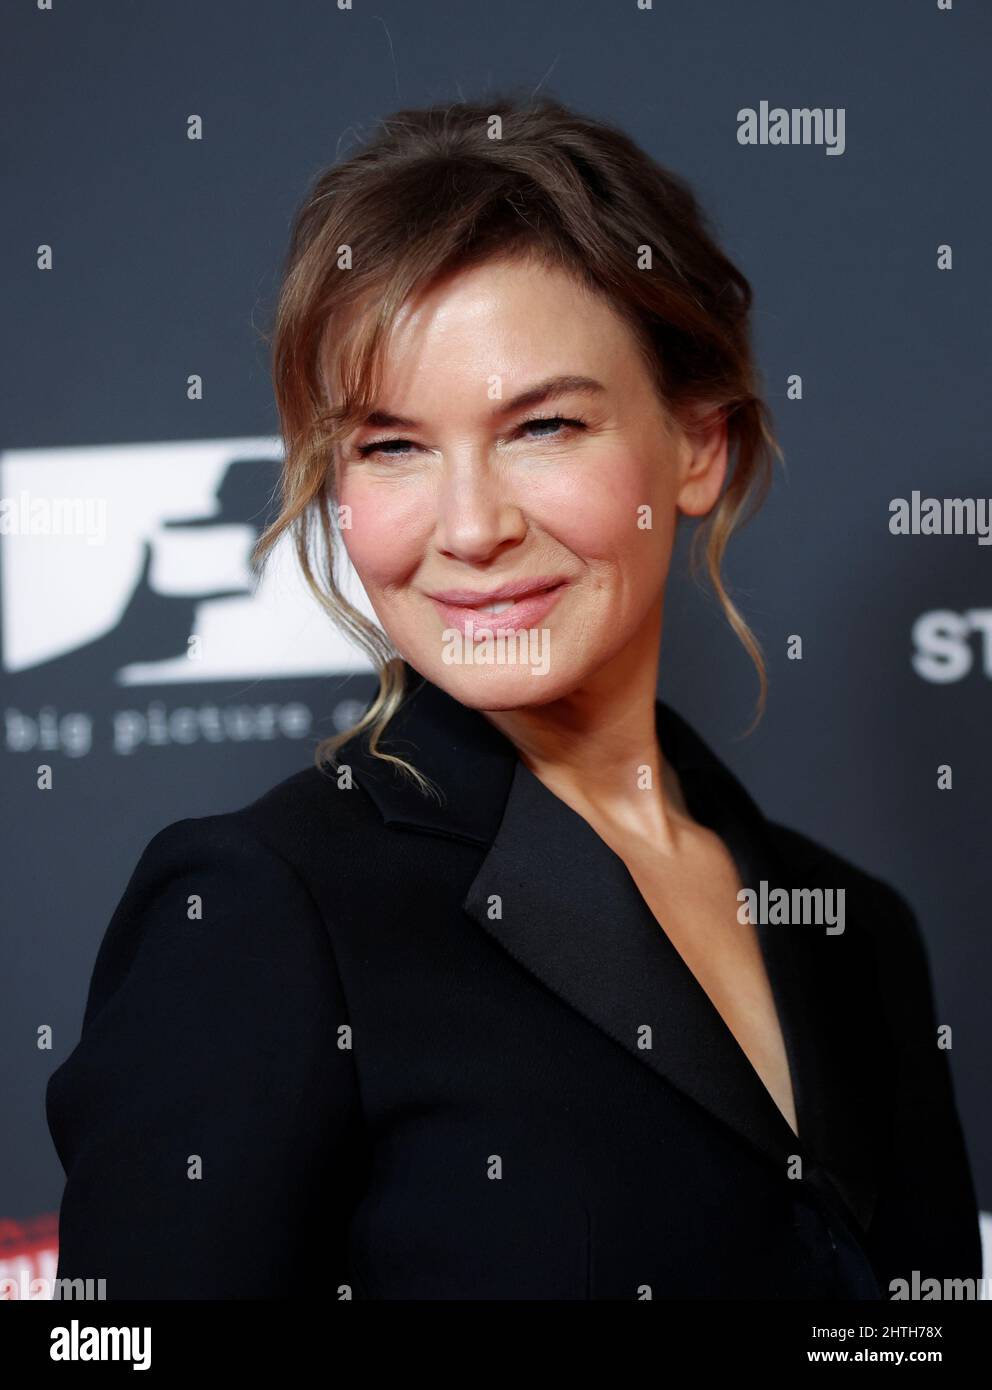 Cast Member Renee Zellweger Attends An Event For The Television Series The Thing About Pam In Beverly Hills California U S February 28 22 Reuters Mario Anzuoni Stock Photo Alamy